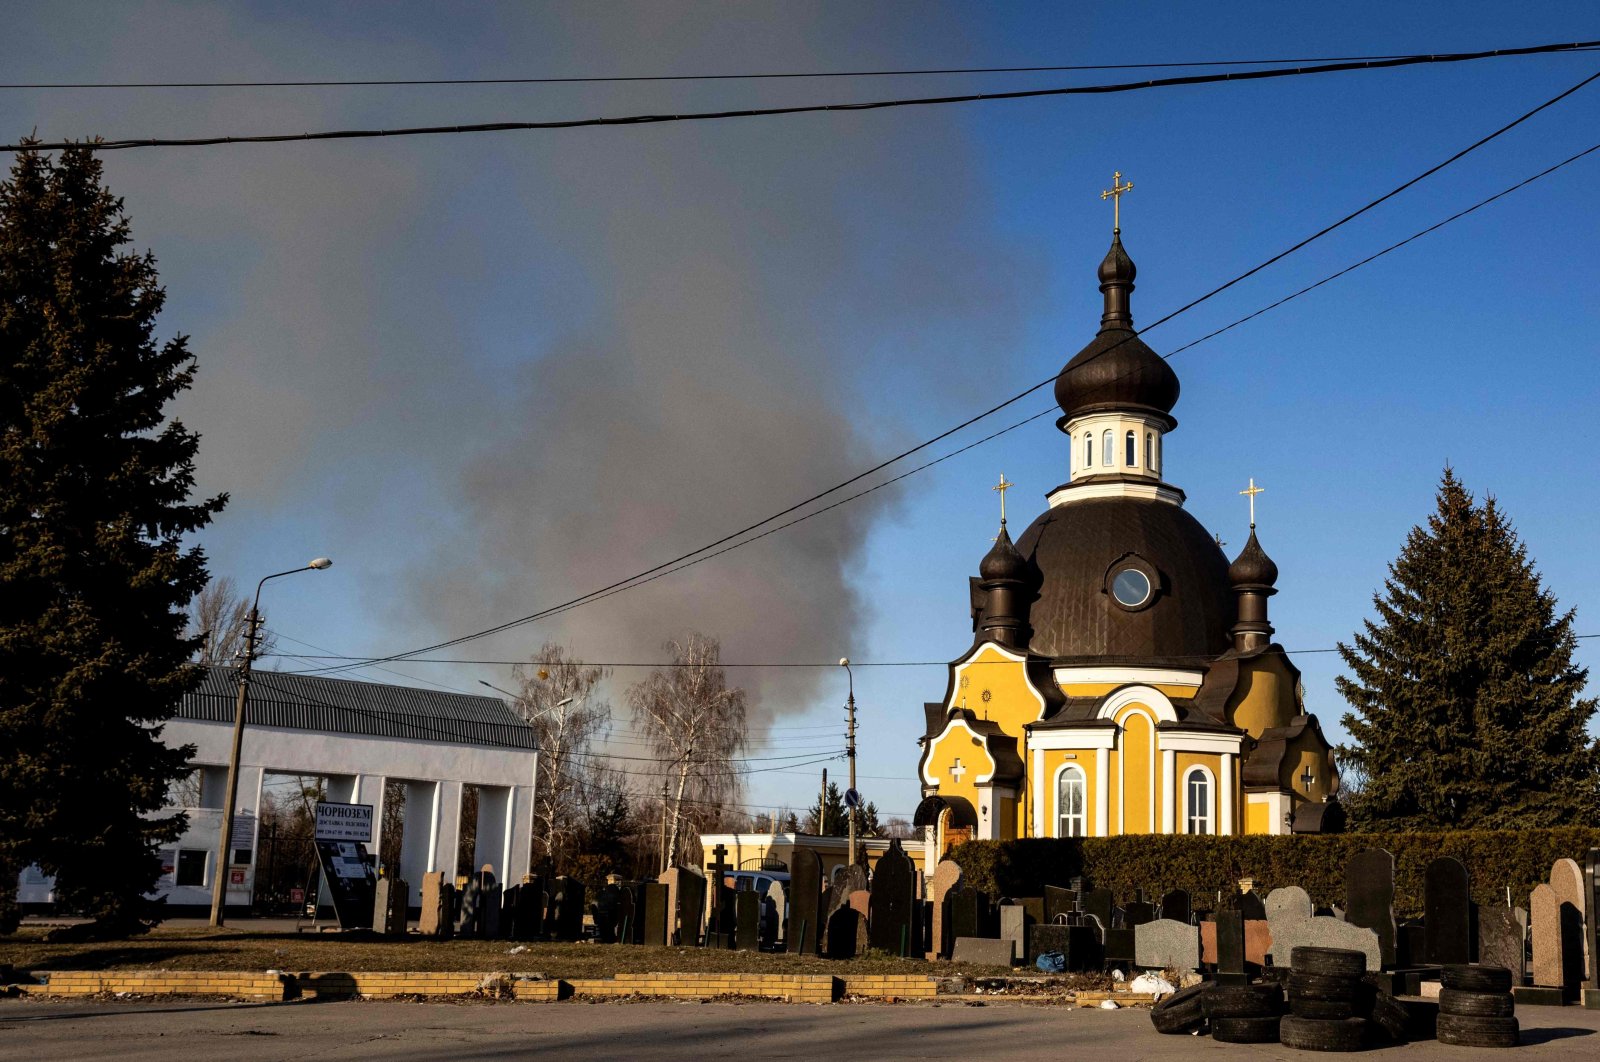 Smoke rises after an explosion in Kyiv on March 17, 2022, as Russian troops try to encircle the Ukrainian capital as part of their slow-moving offensive. (AFP Photo)